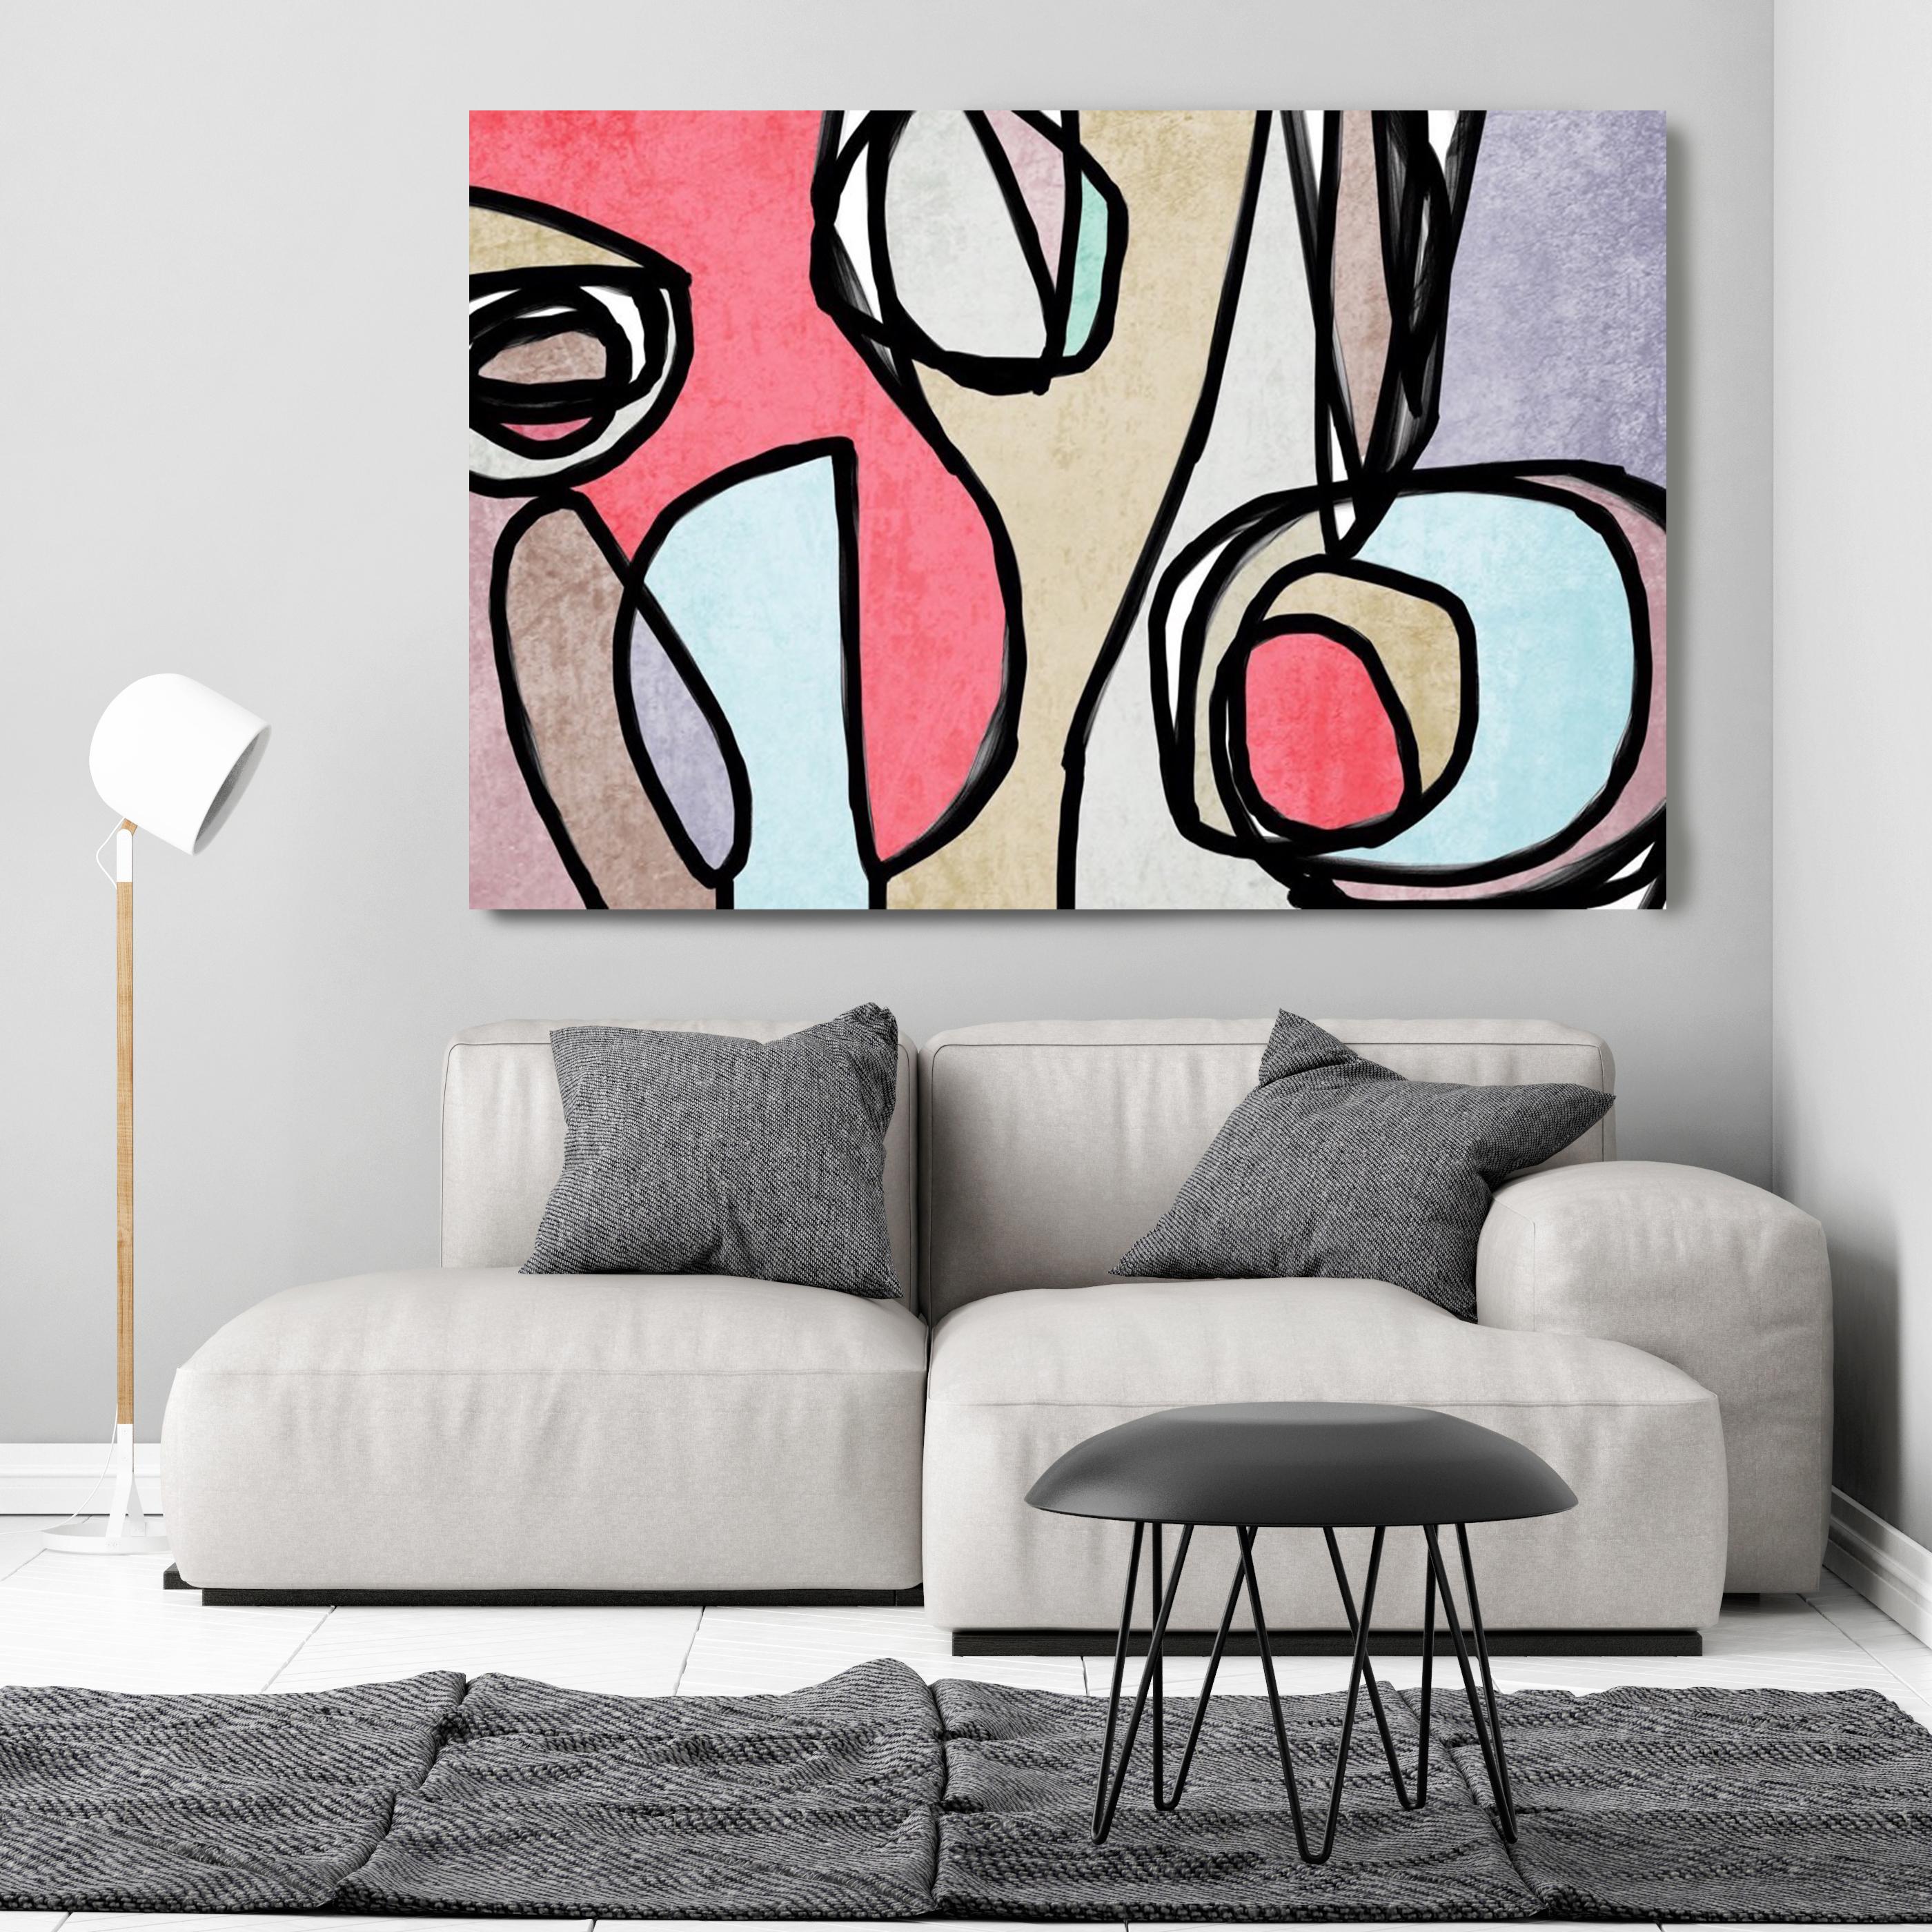 Vibrant Colorful Abstract-0-74,' an exquisite piece of Mid Century Modern Art by the acclaimed artist Irena Orlov.

This is more than just a work of art; it's a limited edition Giclee meticulously hand embellished by the artist herself. Each stroke